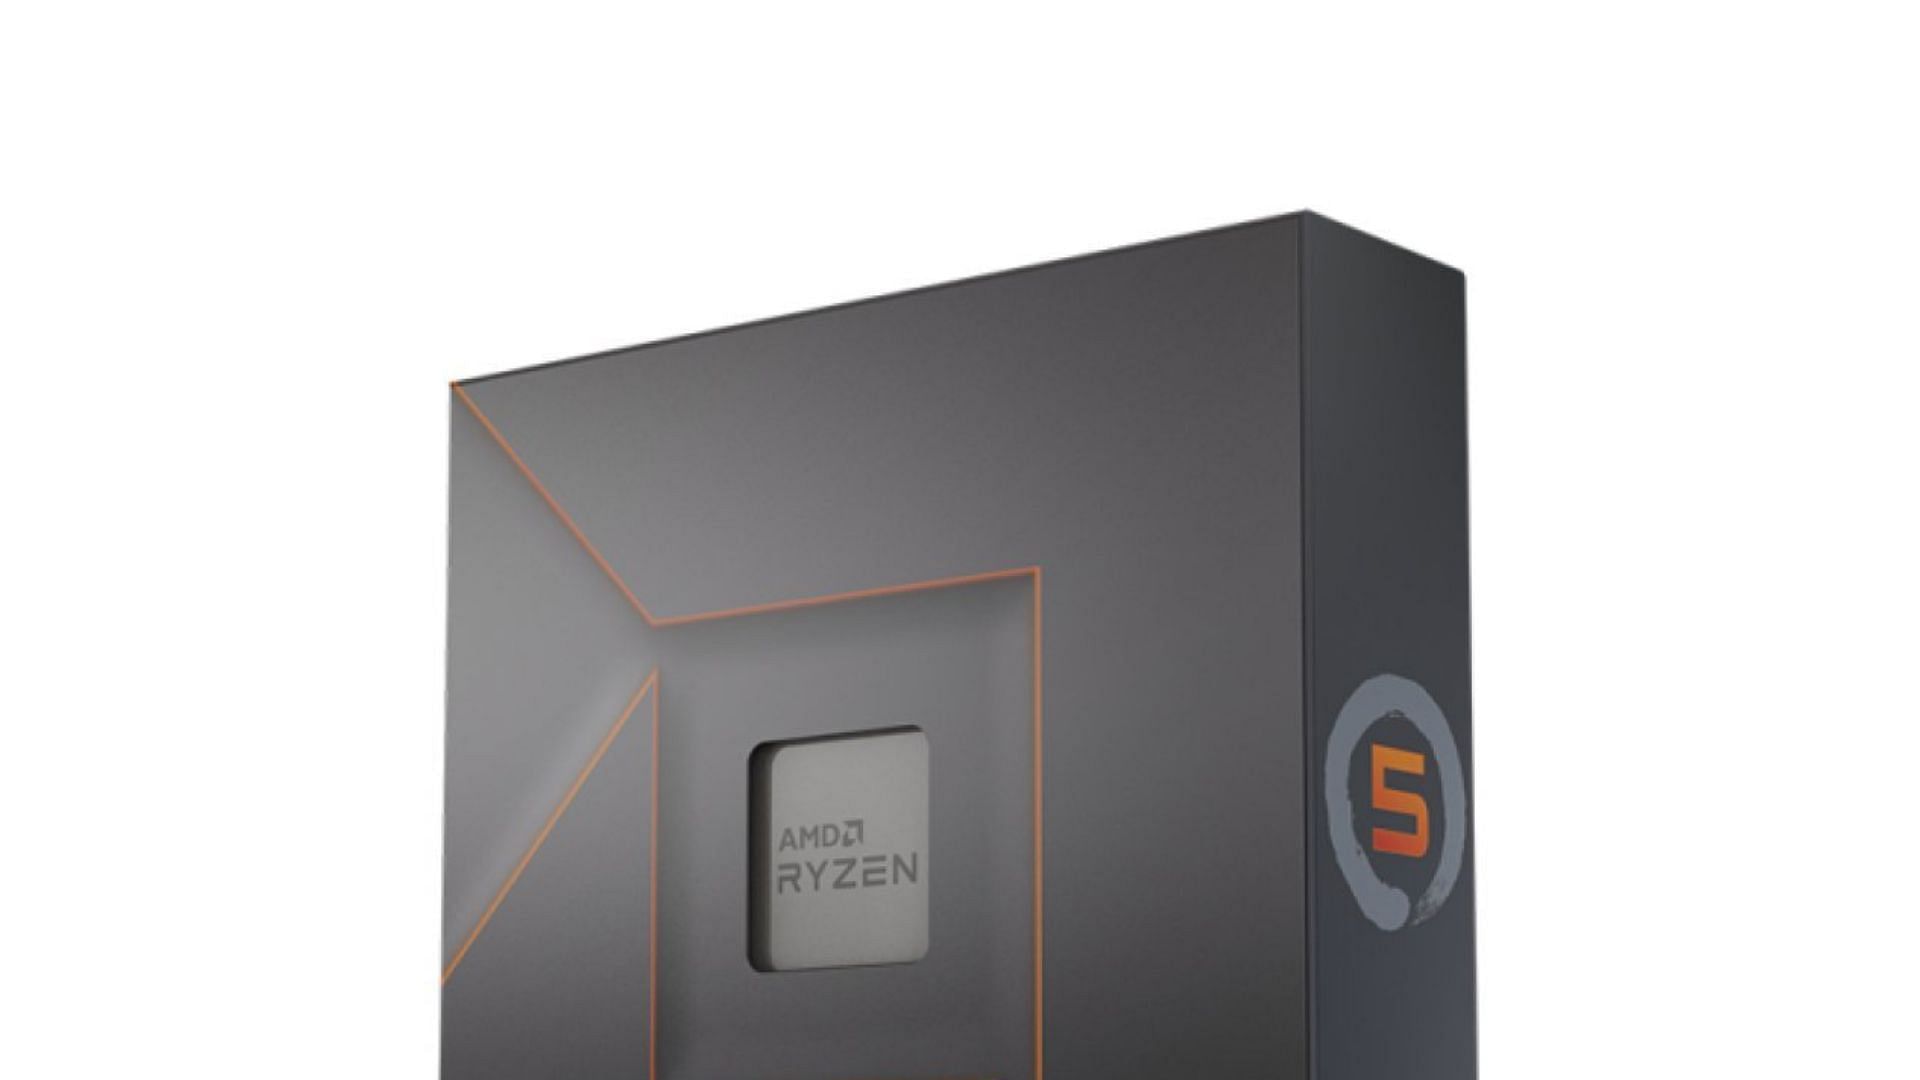 AMD Ryzen 5 7600 Processor with Radeon Graphics (6 Cores 12 Threads with  Max Boost Clock of up to 5.1GHz, Base Clock of 3.8GHz, AM5 Socket and 38MB